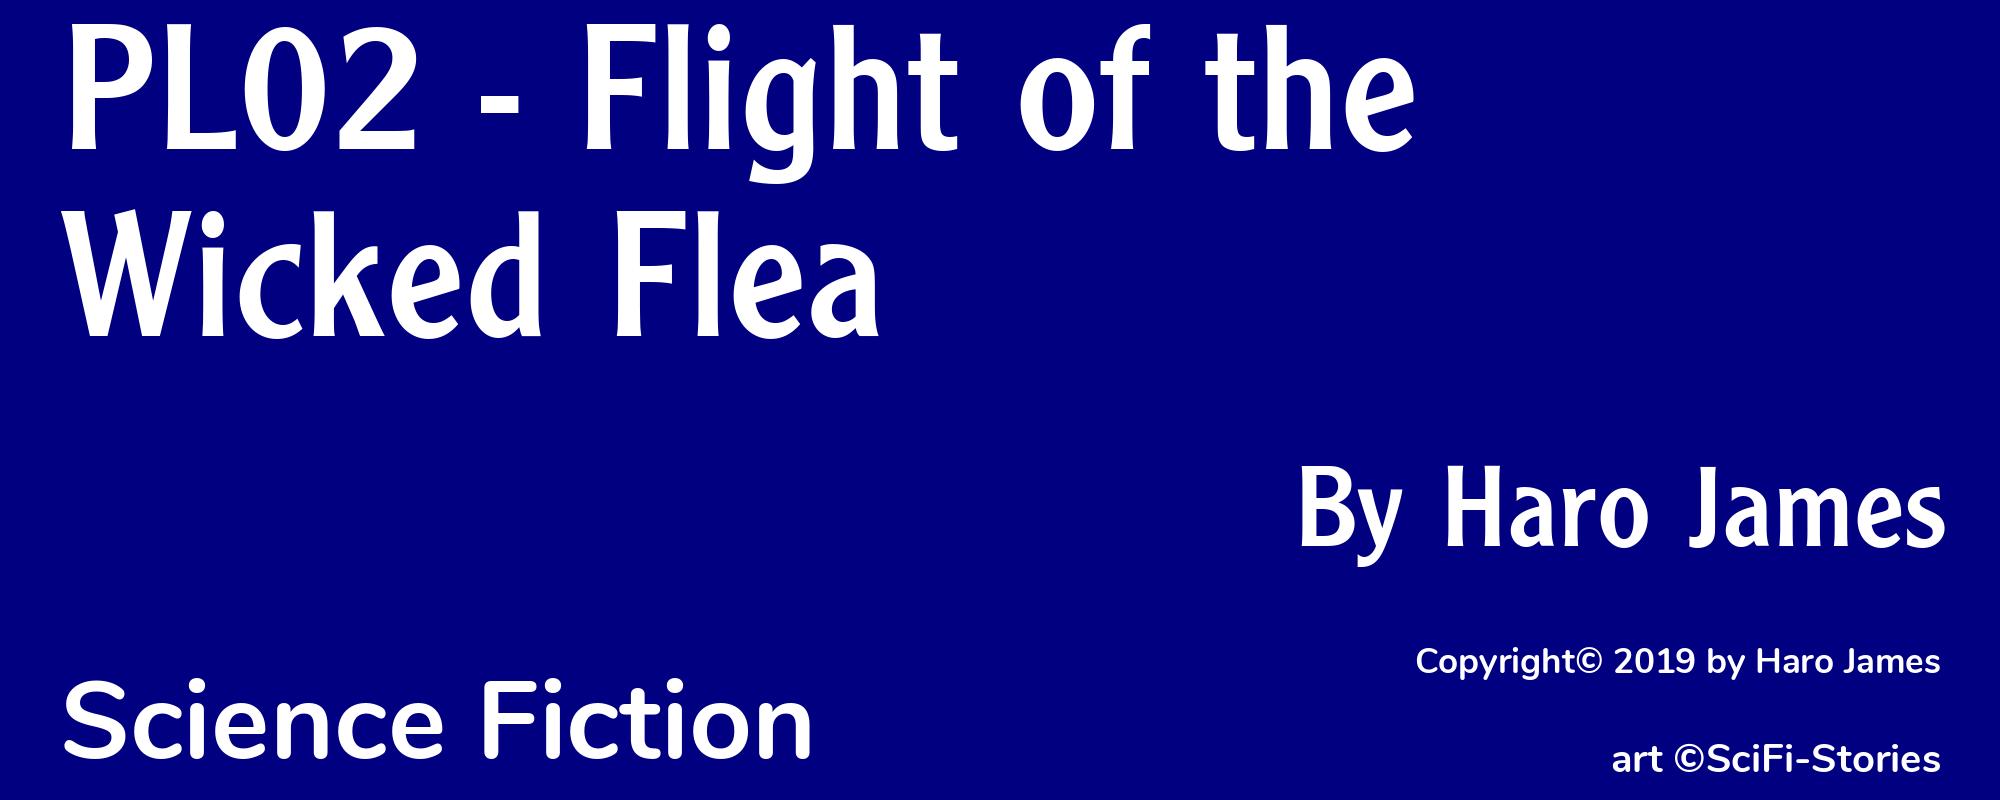 PL02 - Flight of the Wicked Flea - Cover